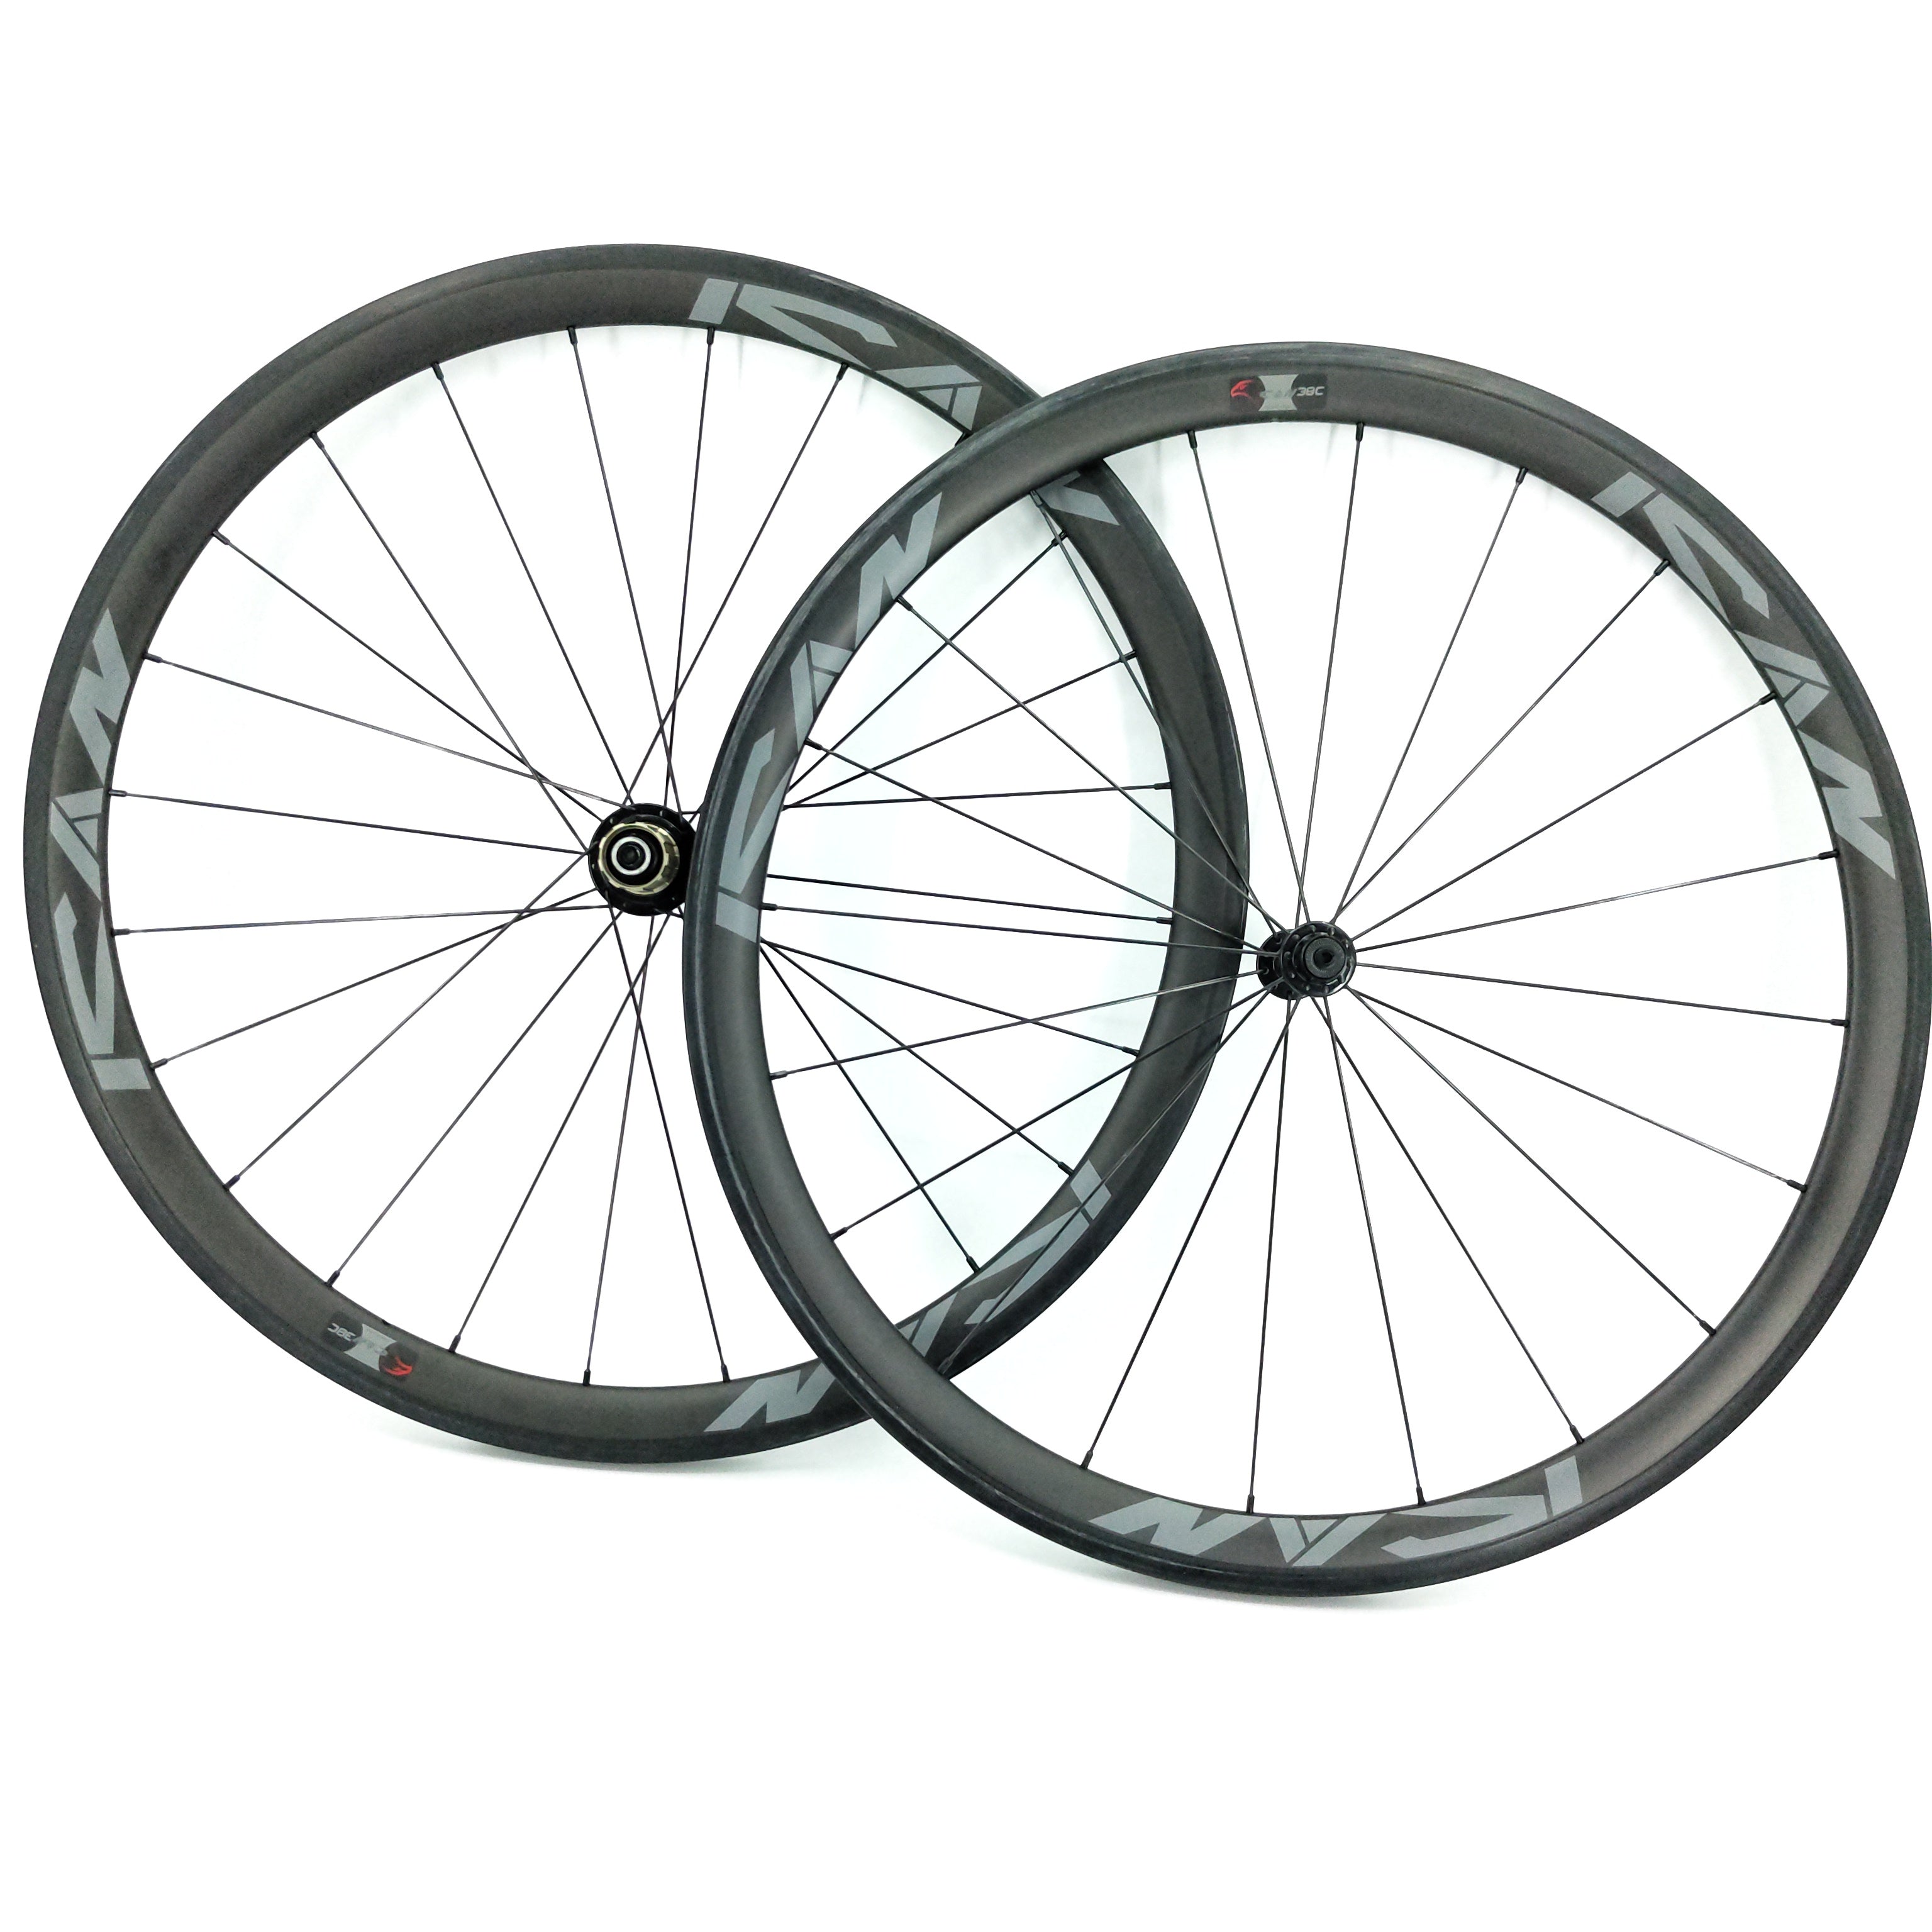 ICAN 38mm Carbon Road Bike Wheelset with Sapim CX-Ray Spokes – ICAN Cycling